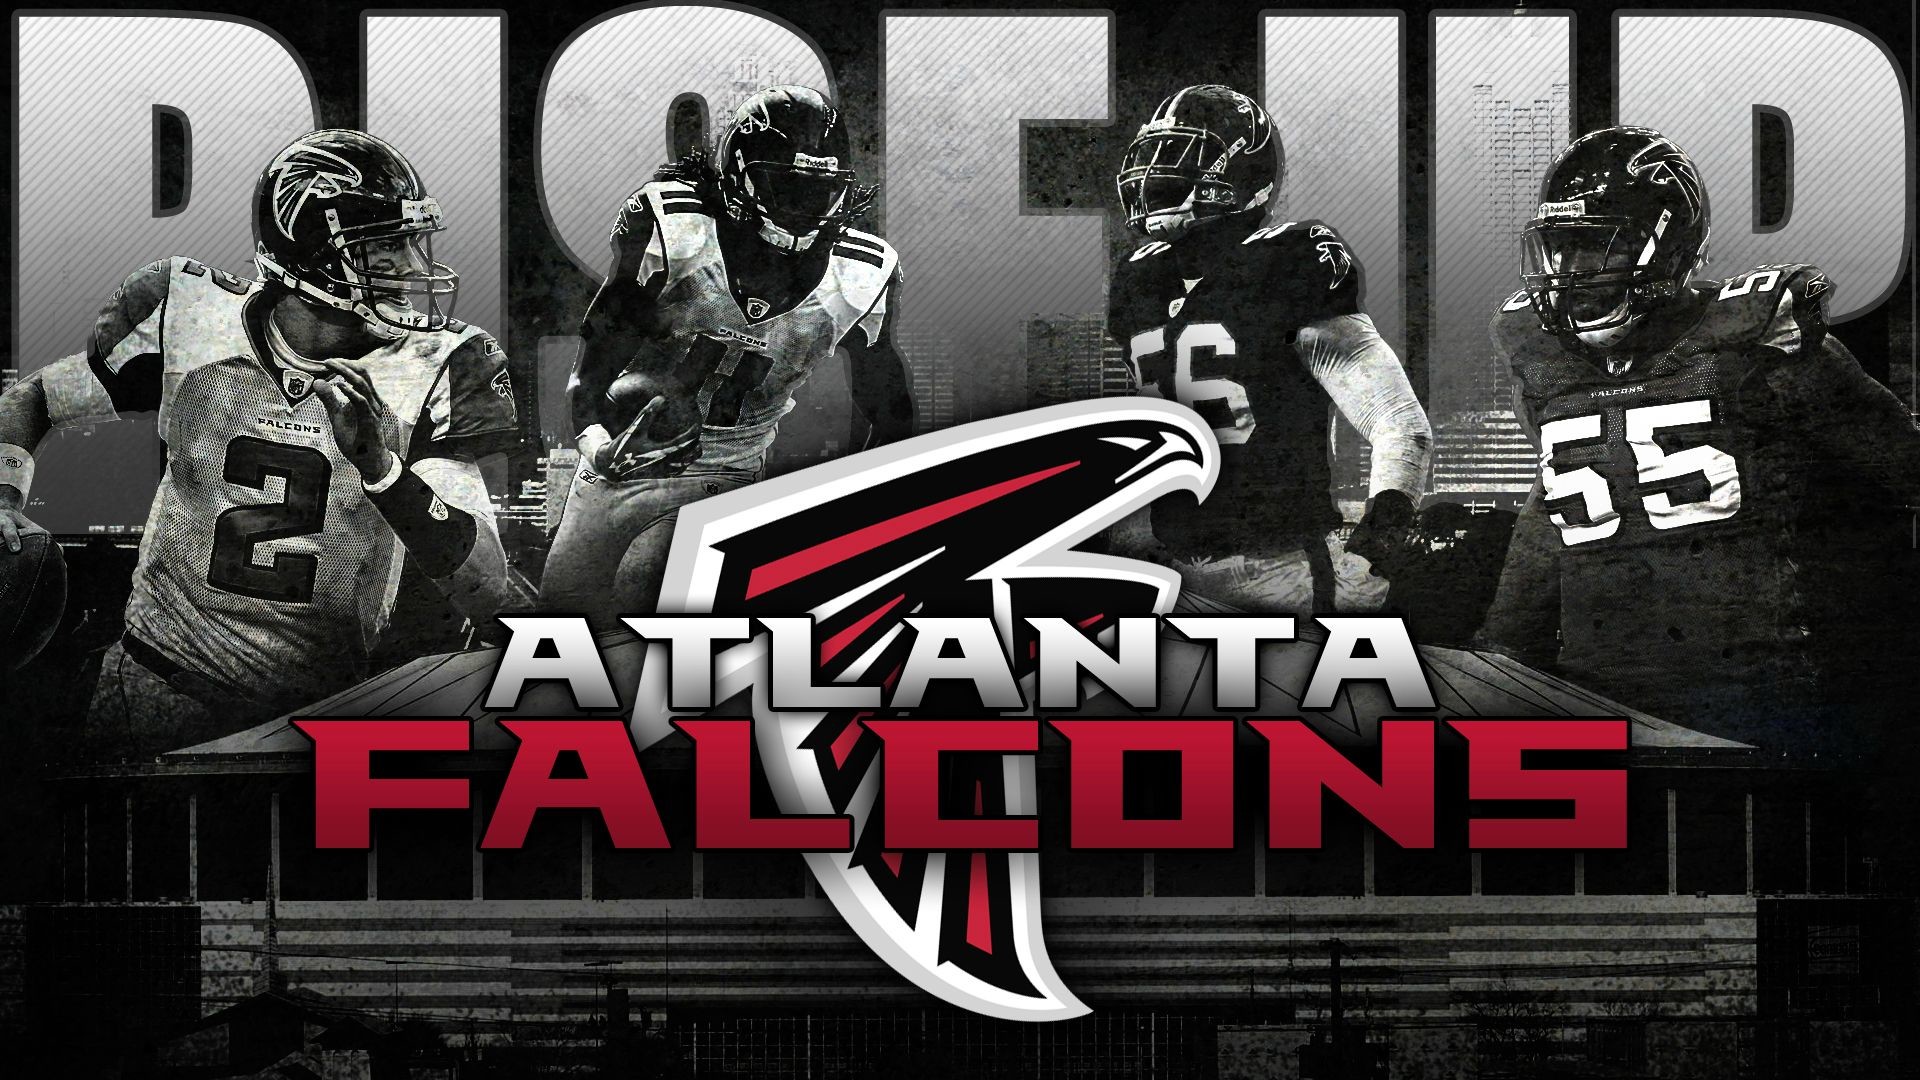 1920x1080 RISE UP FALCONS!! wallpaper i made for the playoffs. - Imgur